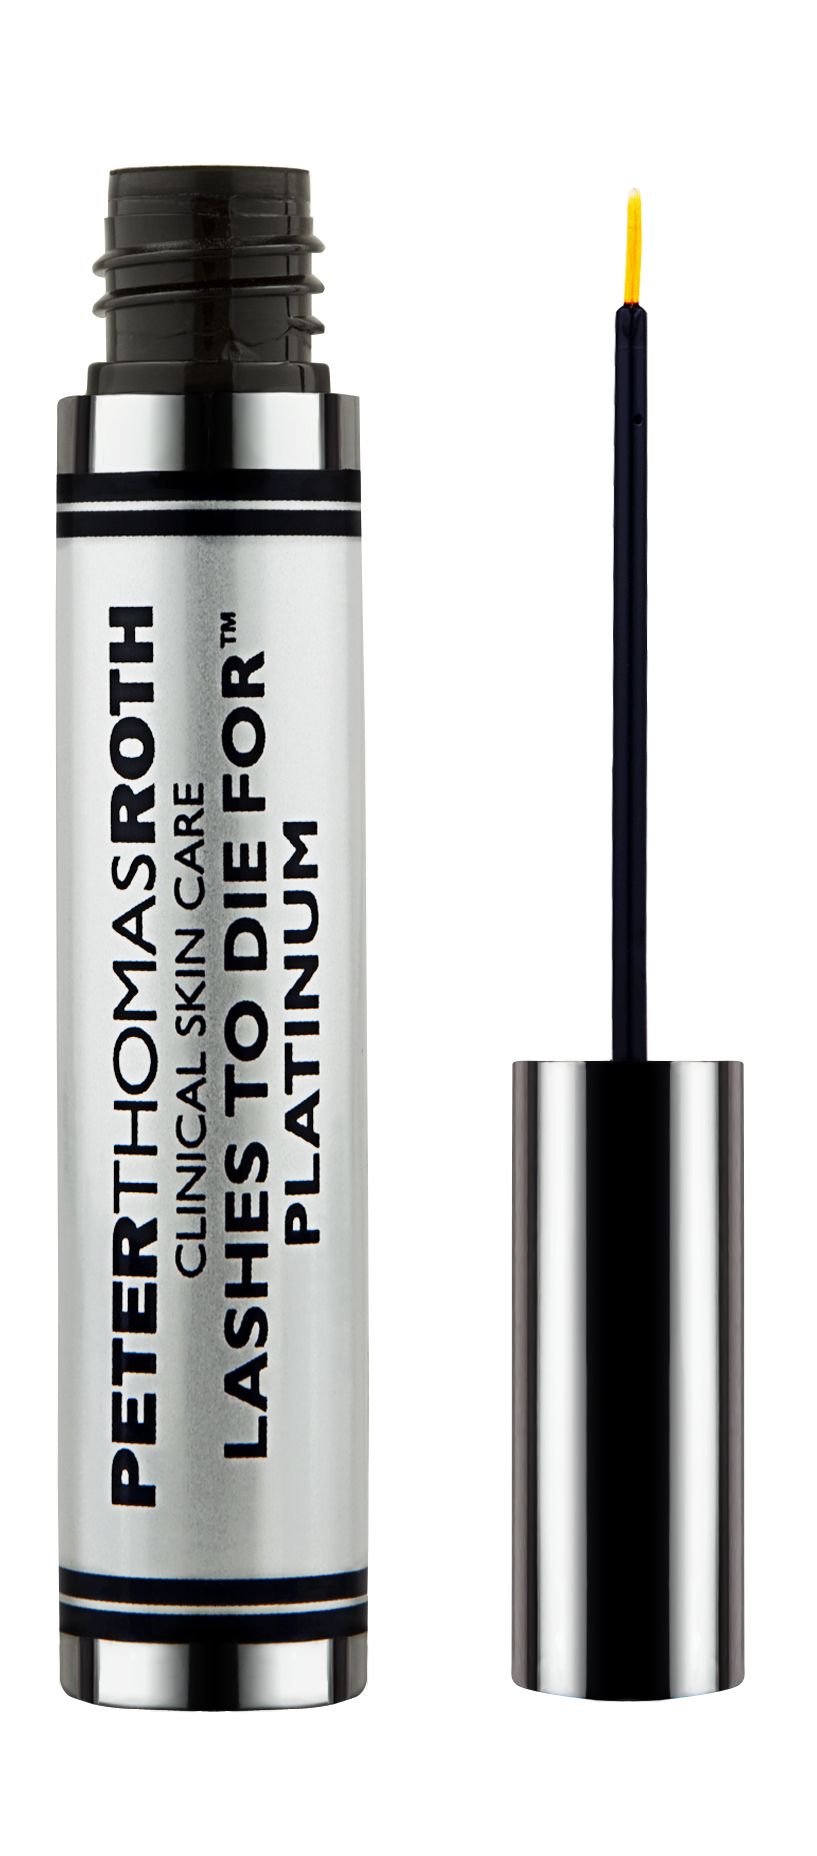 <p>"Lashes need a little TLC sometimes," Sotomayor says. That's where targeted treatments come in. Help lashes grow to their full potential by regularly applying ultra-nourishing treatments, like <a href="http://www.sephora.com/lashes-to-die-for-turbo-nighttime-eyelash-treatment-P381031" target="_blank">Peter Thomas Roth Lashes To Die For Turbo Nighttime Eyelash Treatment</a> ($85).</p>